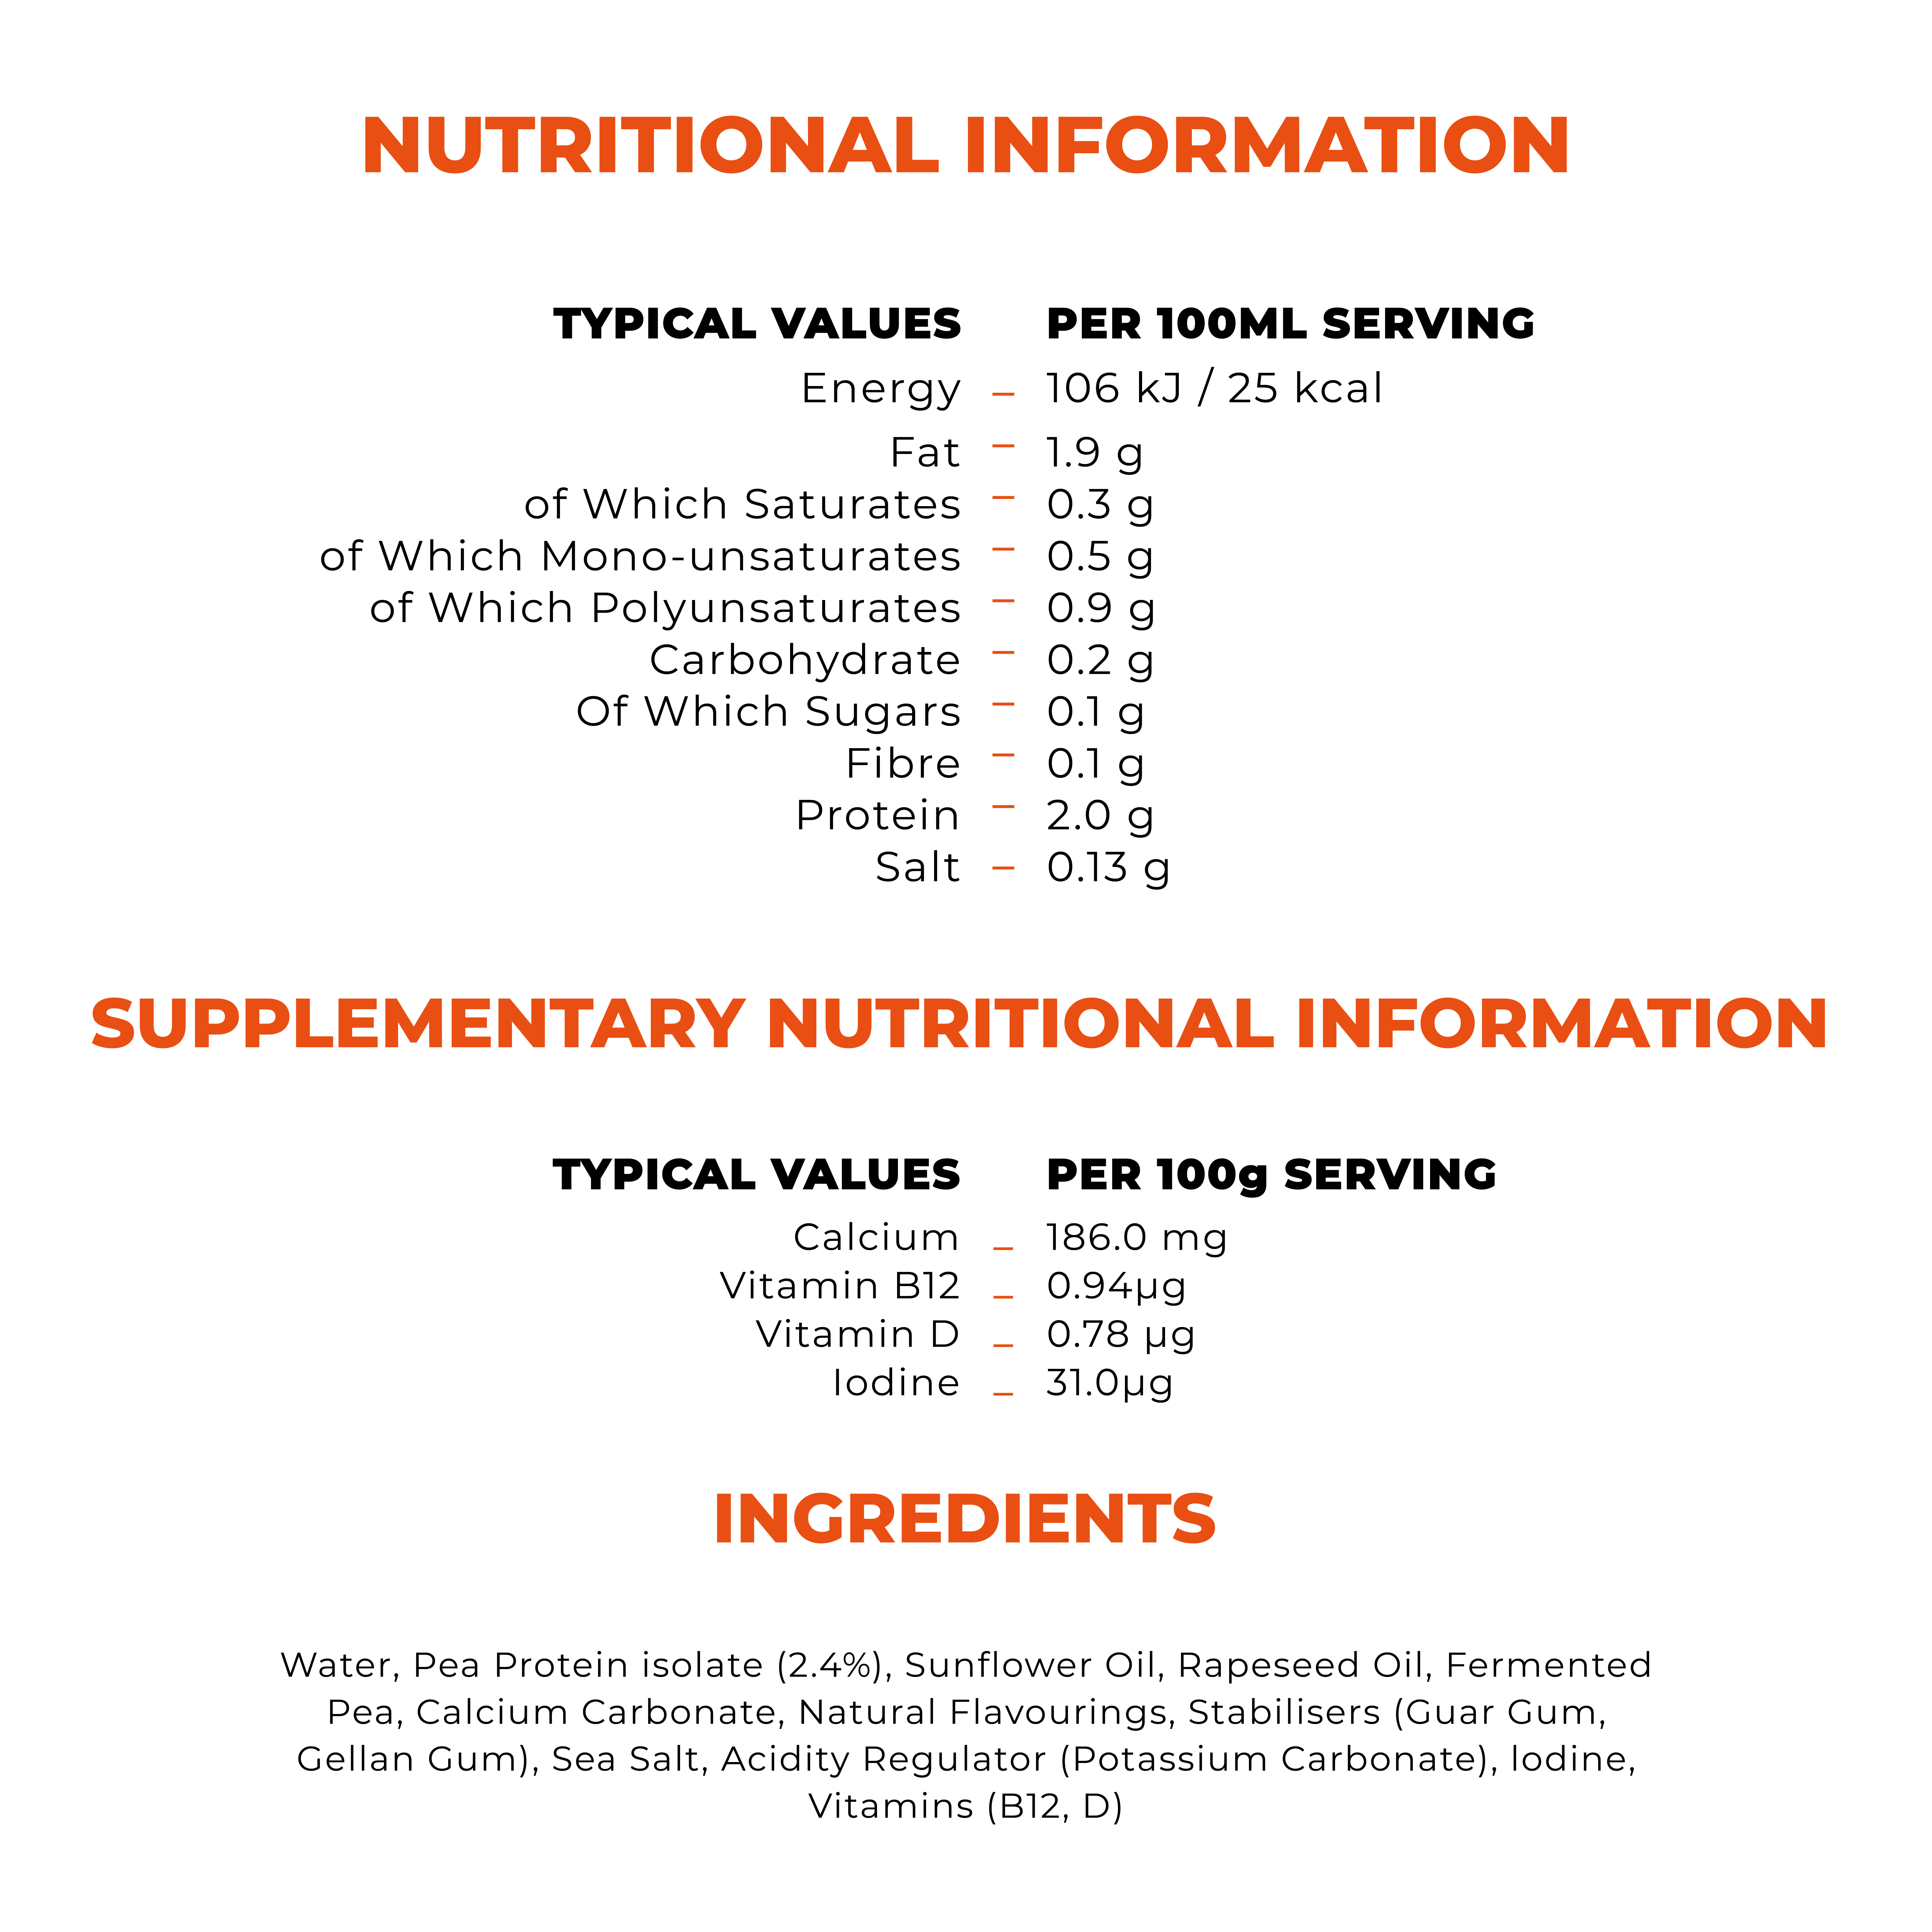 

                          TYPICAL VALUES PER 100ML SERVING Energy 113 kJ / 27 kcal Fat 1.9 g of Which Saturates 0.3 g of Which Mono-unsaturates 0.5 g of Which Polyunsaturates 0.8 g Carbohydrate 0.1 g of Which Sugars 0.1 g Fibre 0.1 g Protein 2.4 g Salt 0.2 g 
                          L'UPPLEMENTARY NUTRITIONAL INFORMATION 
                          TYPICAL VALUES PER 100g SERVING Calcium _ 186.0 mg Vitamin B12 _ 0.94 pg Vitamin D _ 0.78 pg Iodine _ 31.0 pg 

                          Water, Pea Protein Isolate (3%), Sunflower Oil, Calcium Carbonate, Natural Flavourings, Stabilisers (Guar Gum, Gellan Gum), Acidity Regulator (Potassium Carbonate), Sea Salt, Iodine, Vitamins (B12, D) 

                          